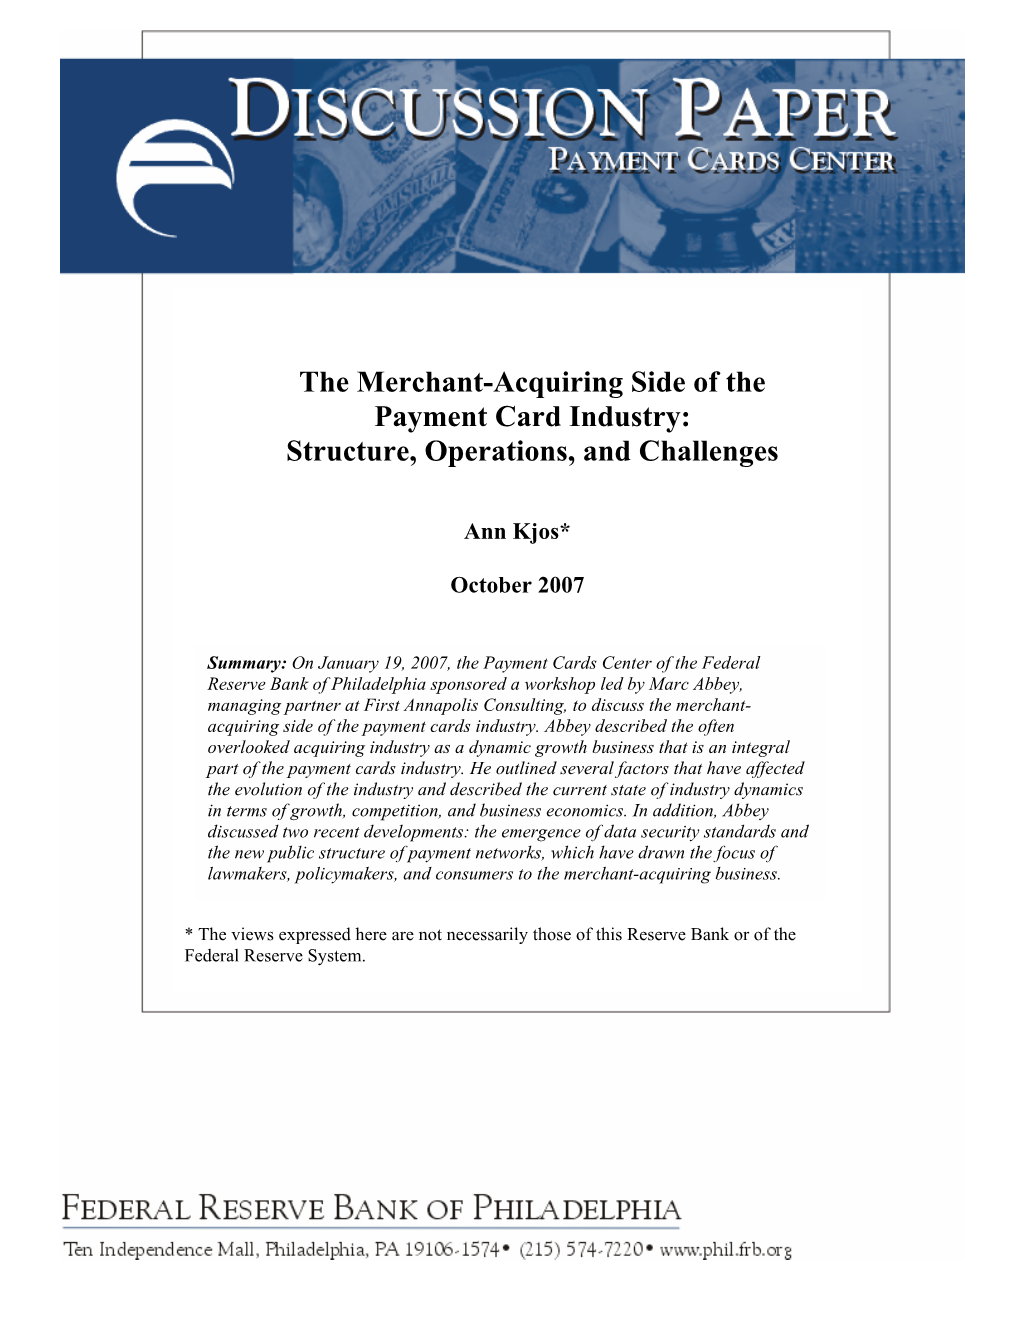 The Merchant-Acquiring Side of the Payment Card Industry: Structure, Operations, and Challenges